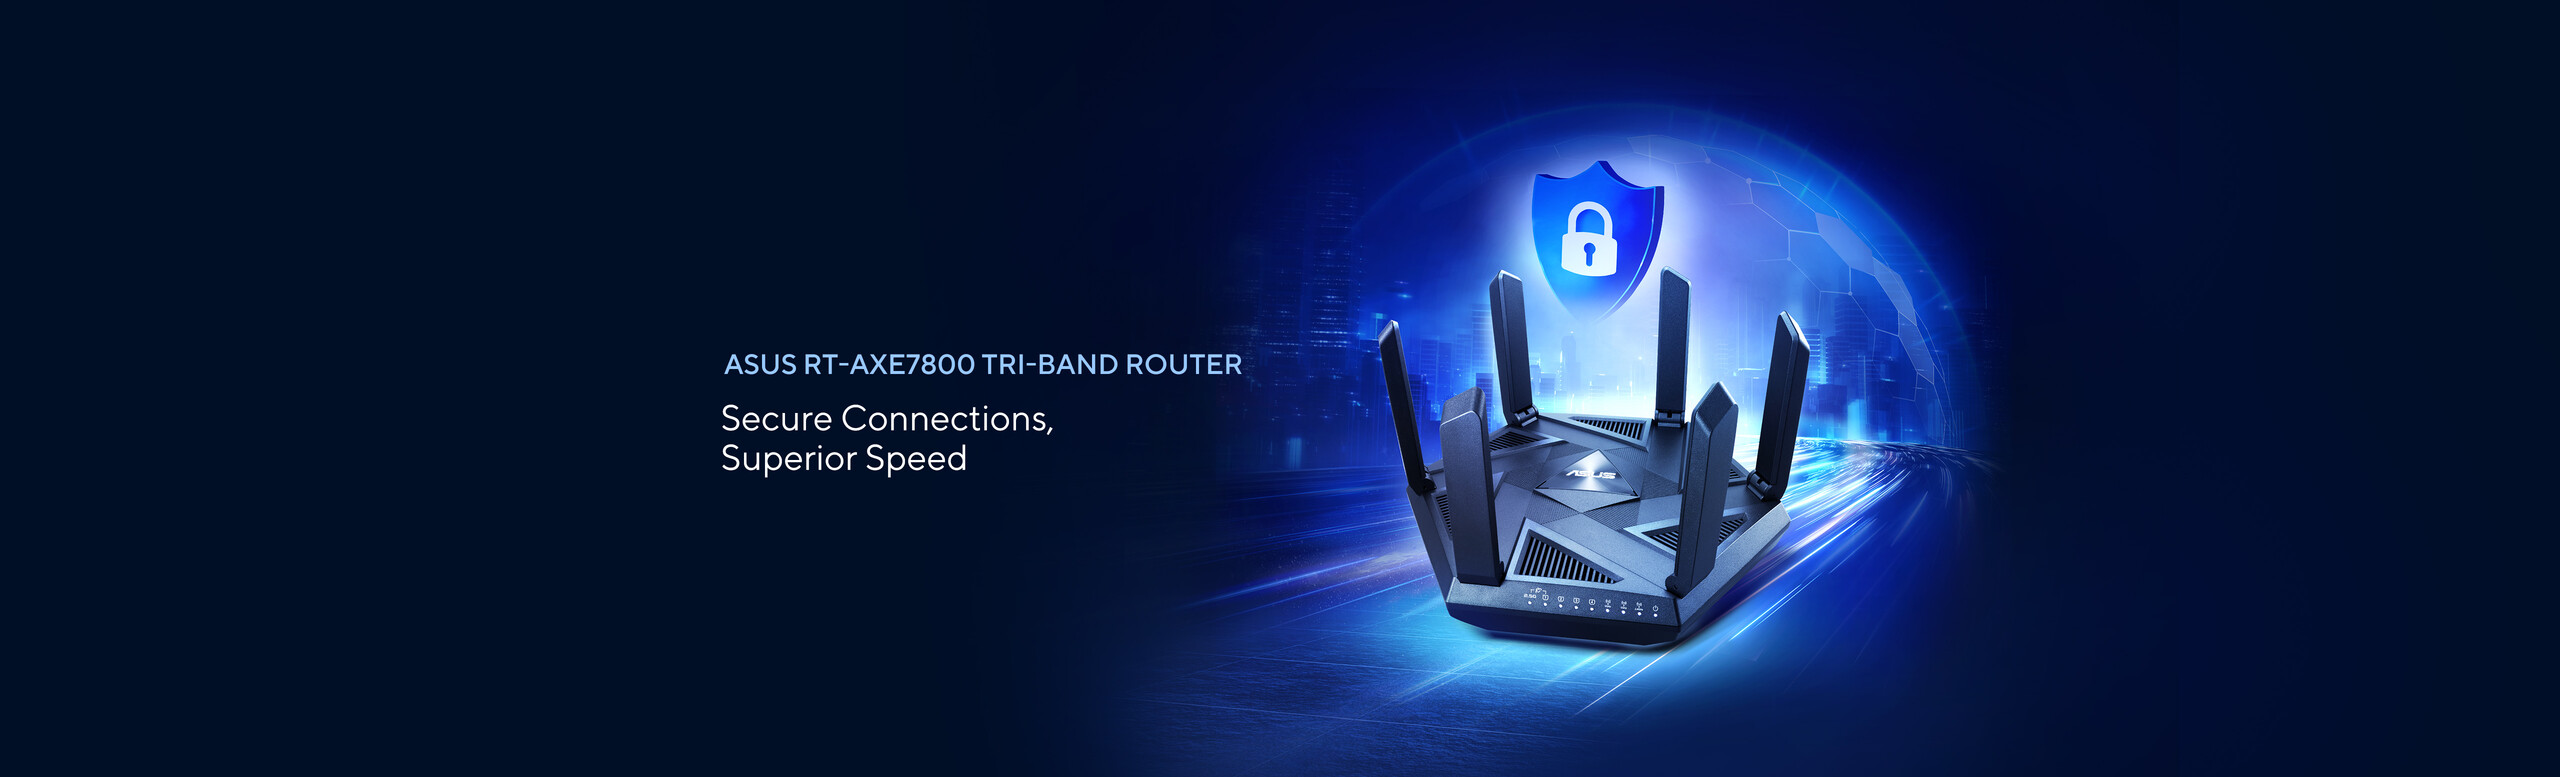 ASUS RT-AXE7800 Tri-band Router